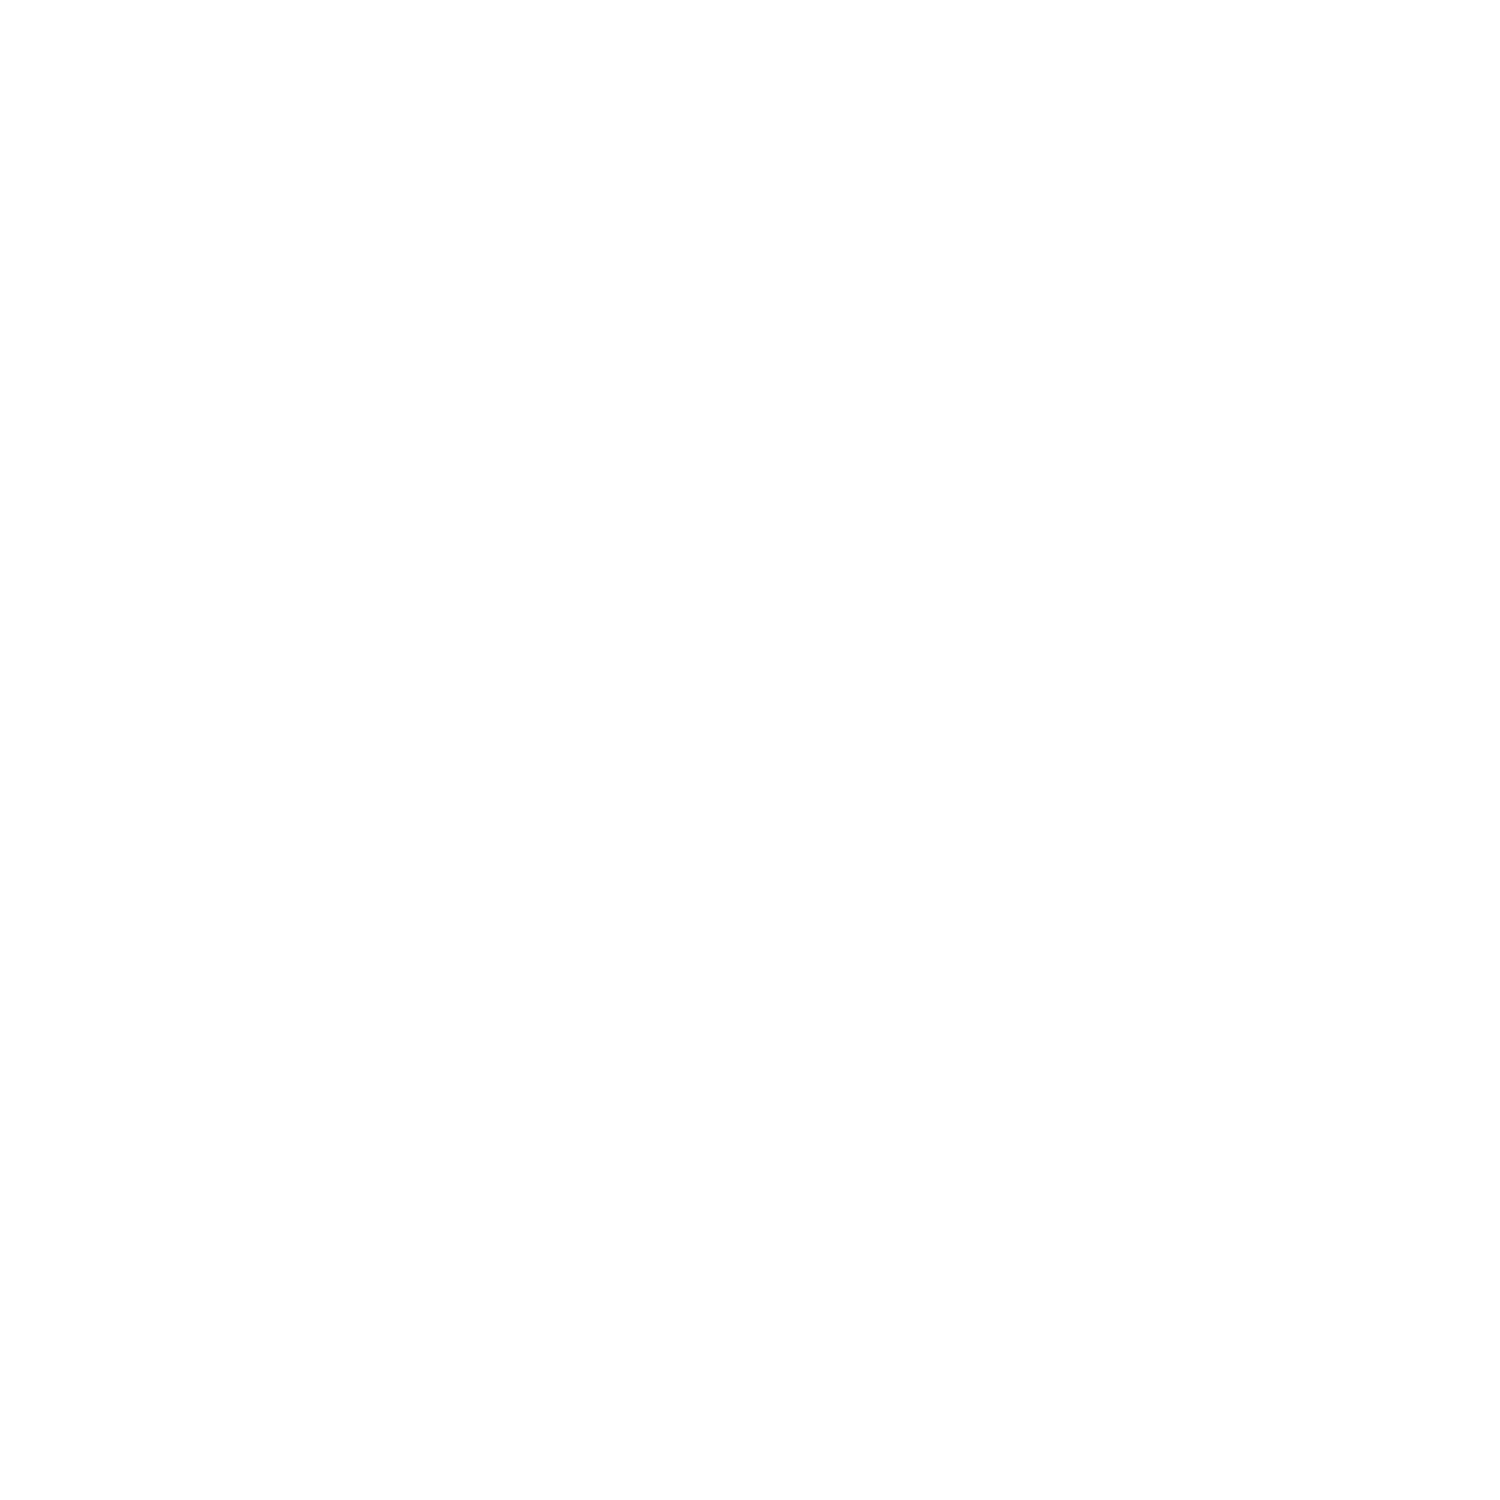 Beyond The Fringe are your local unisex hair salon in West Bridgford, Nottingham